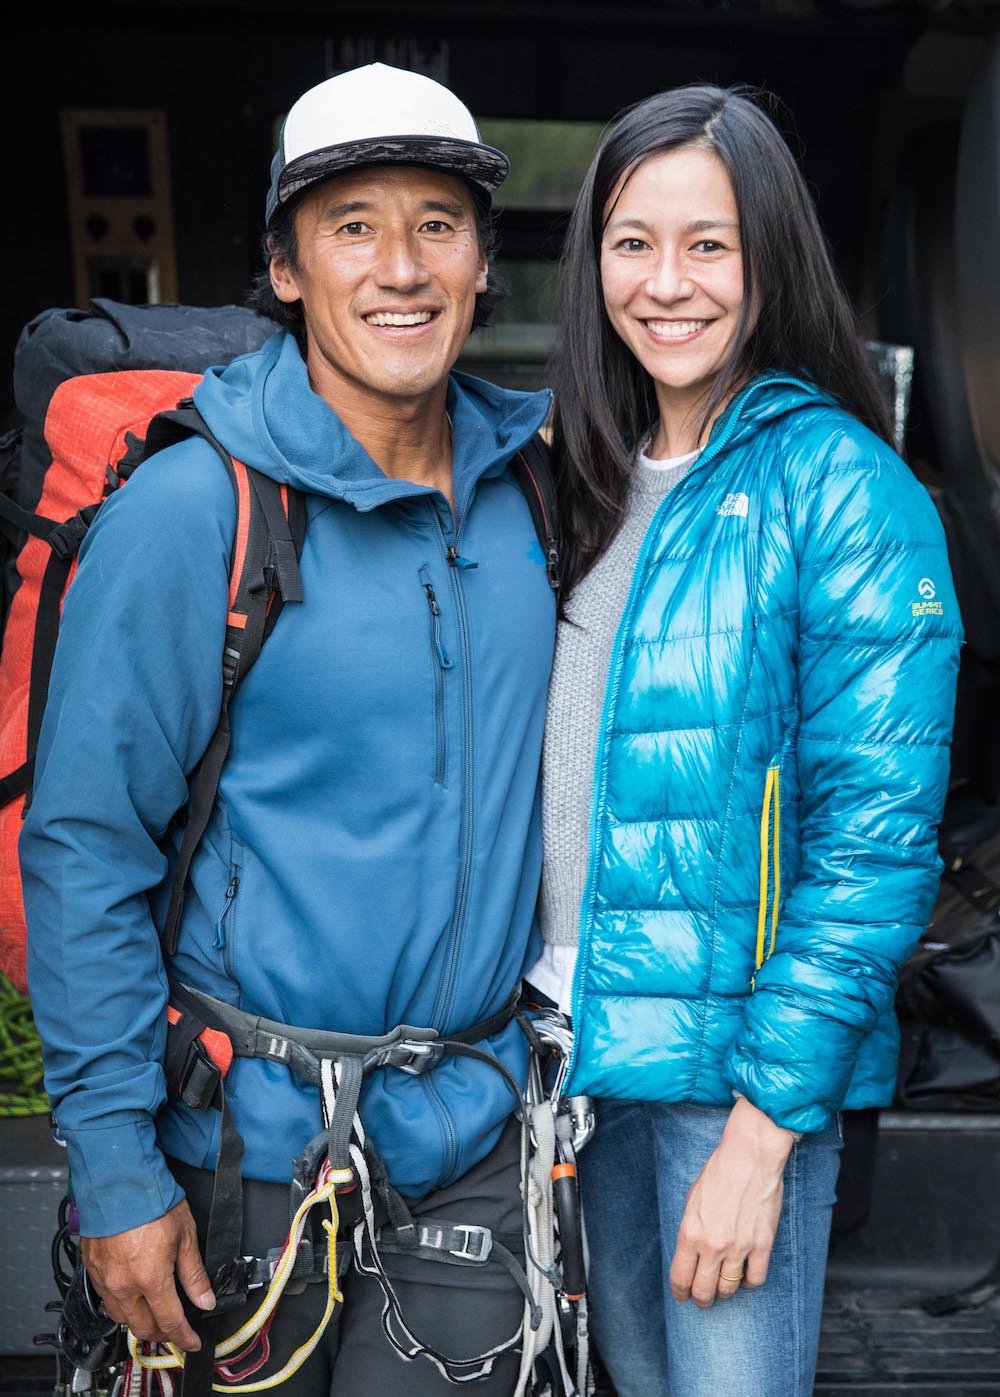 Jimmy Chin and his wife, E. Chai Vasarhelyi smile together